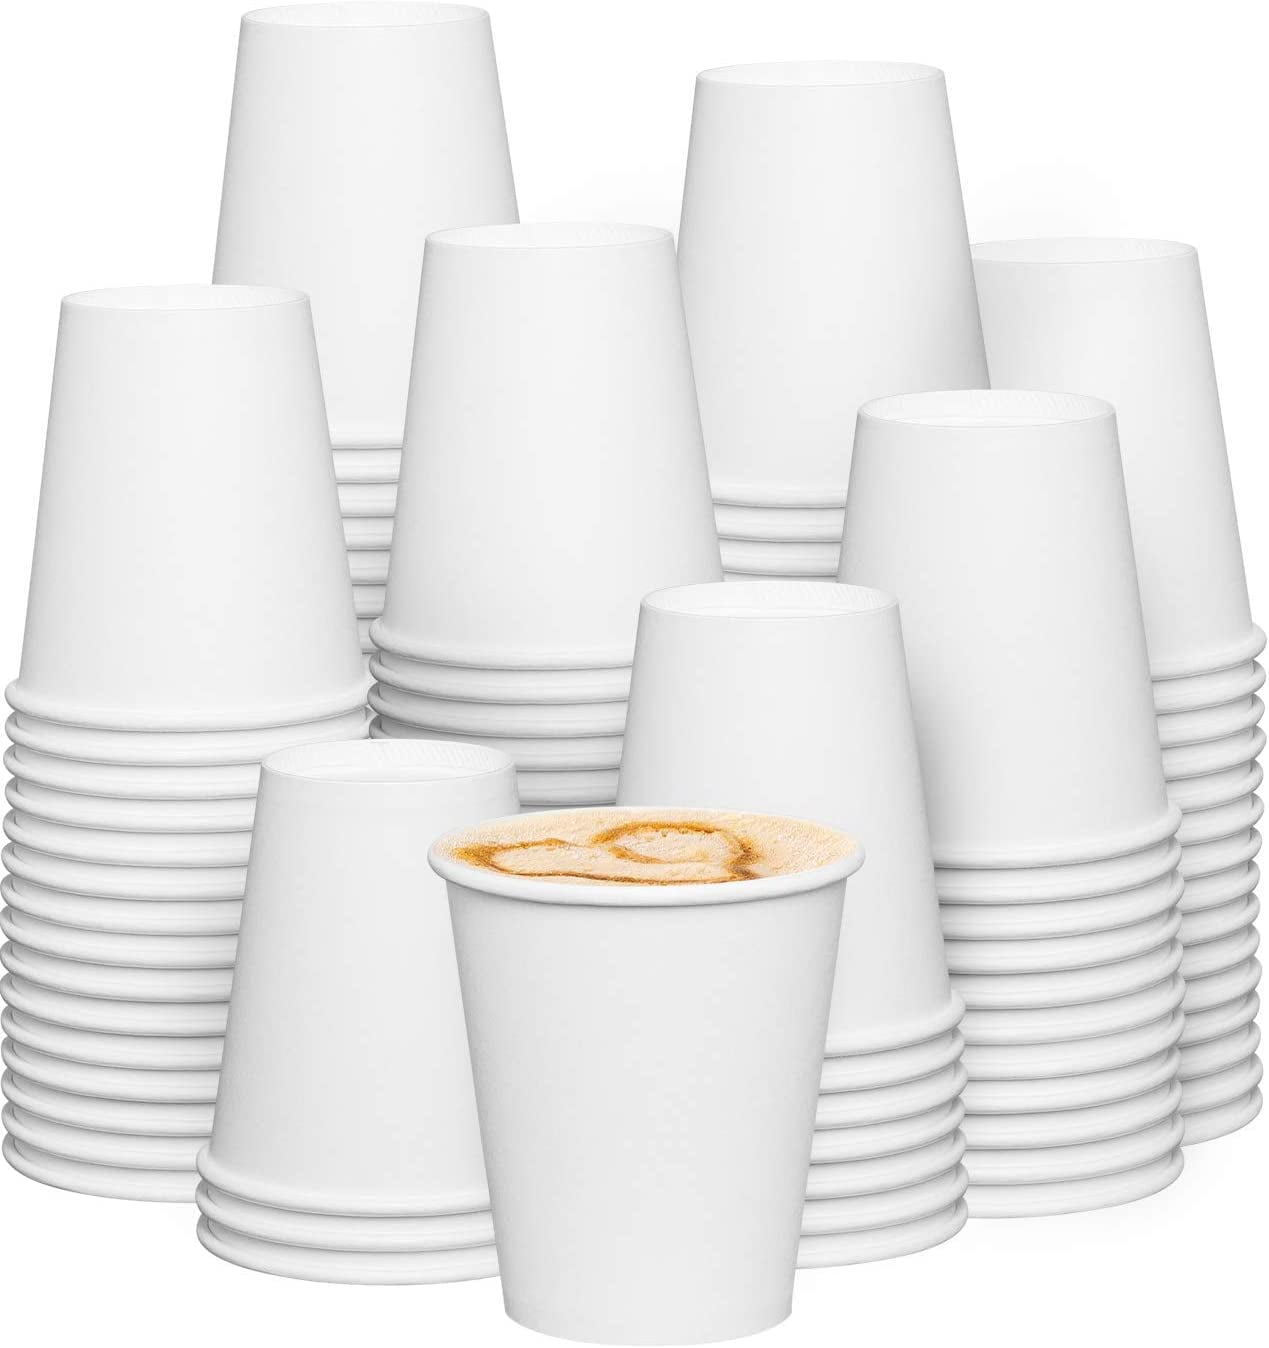 50pk 4oz White Black or bamboo cups with lid Takeaway disposable